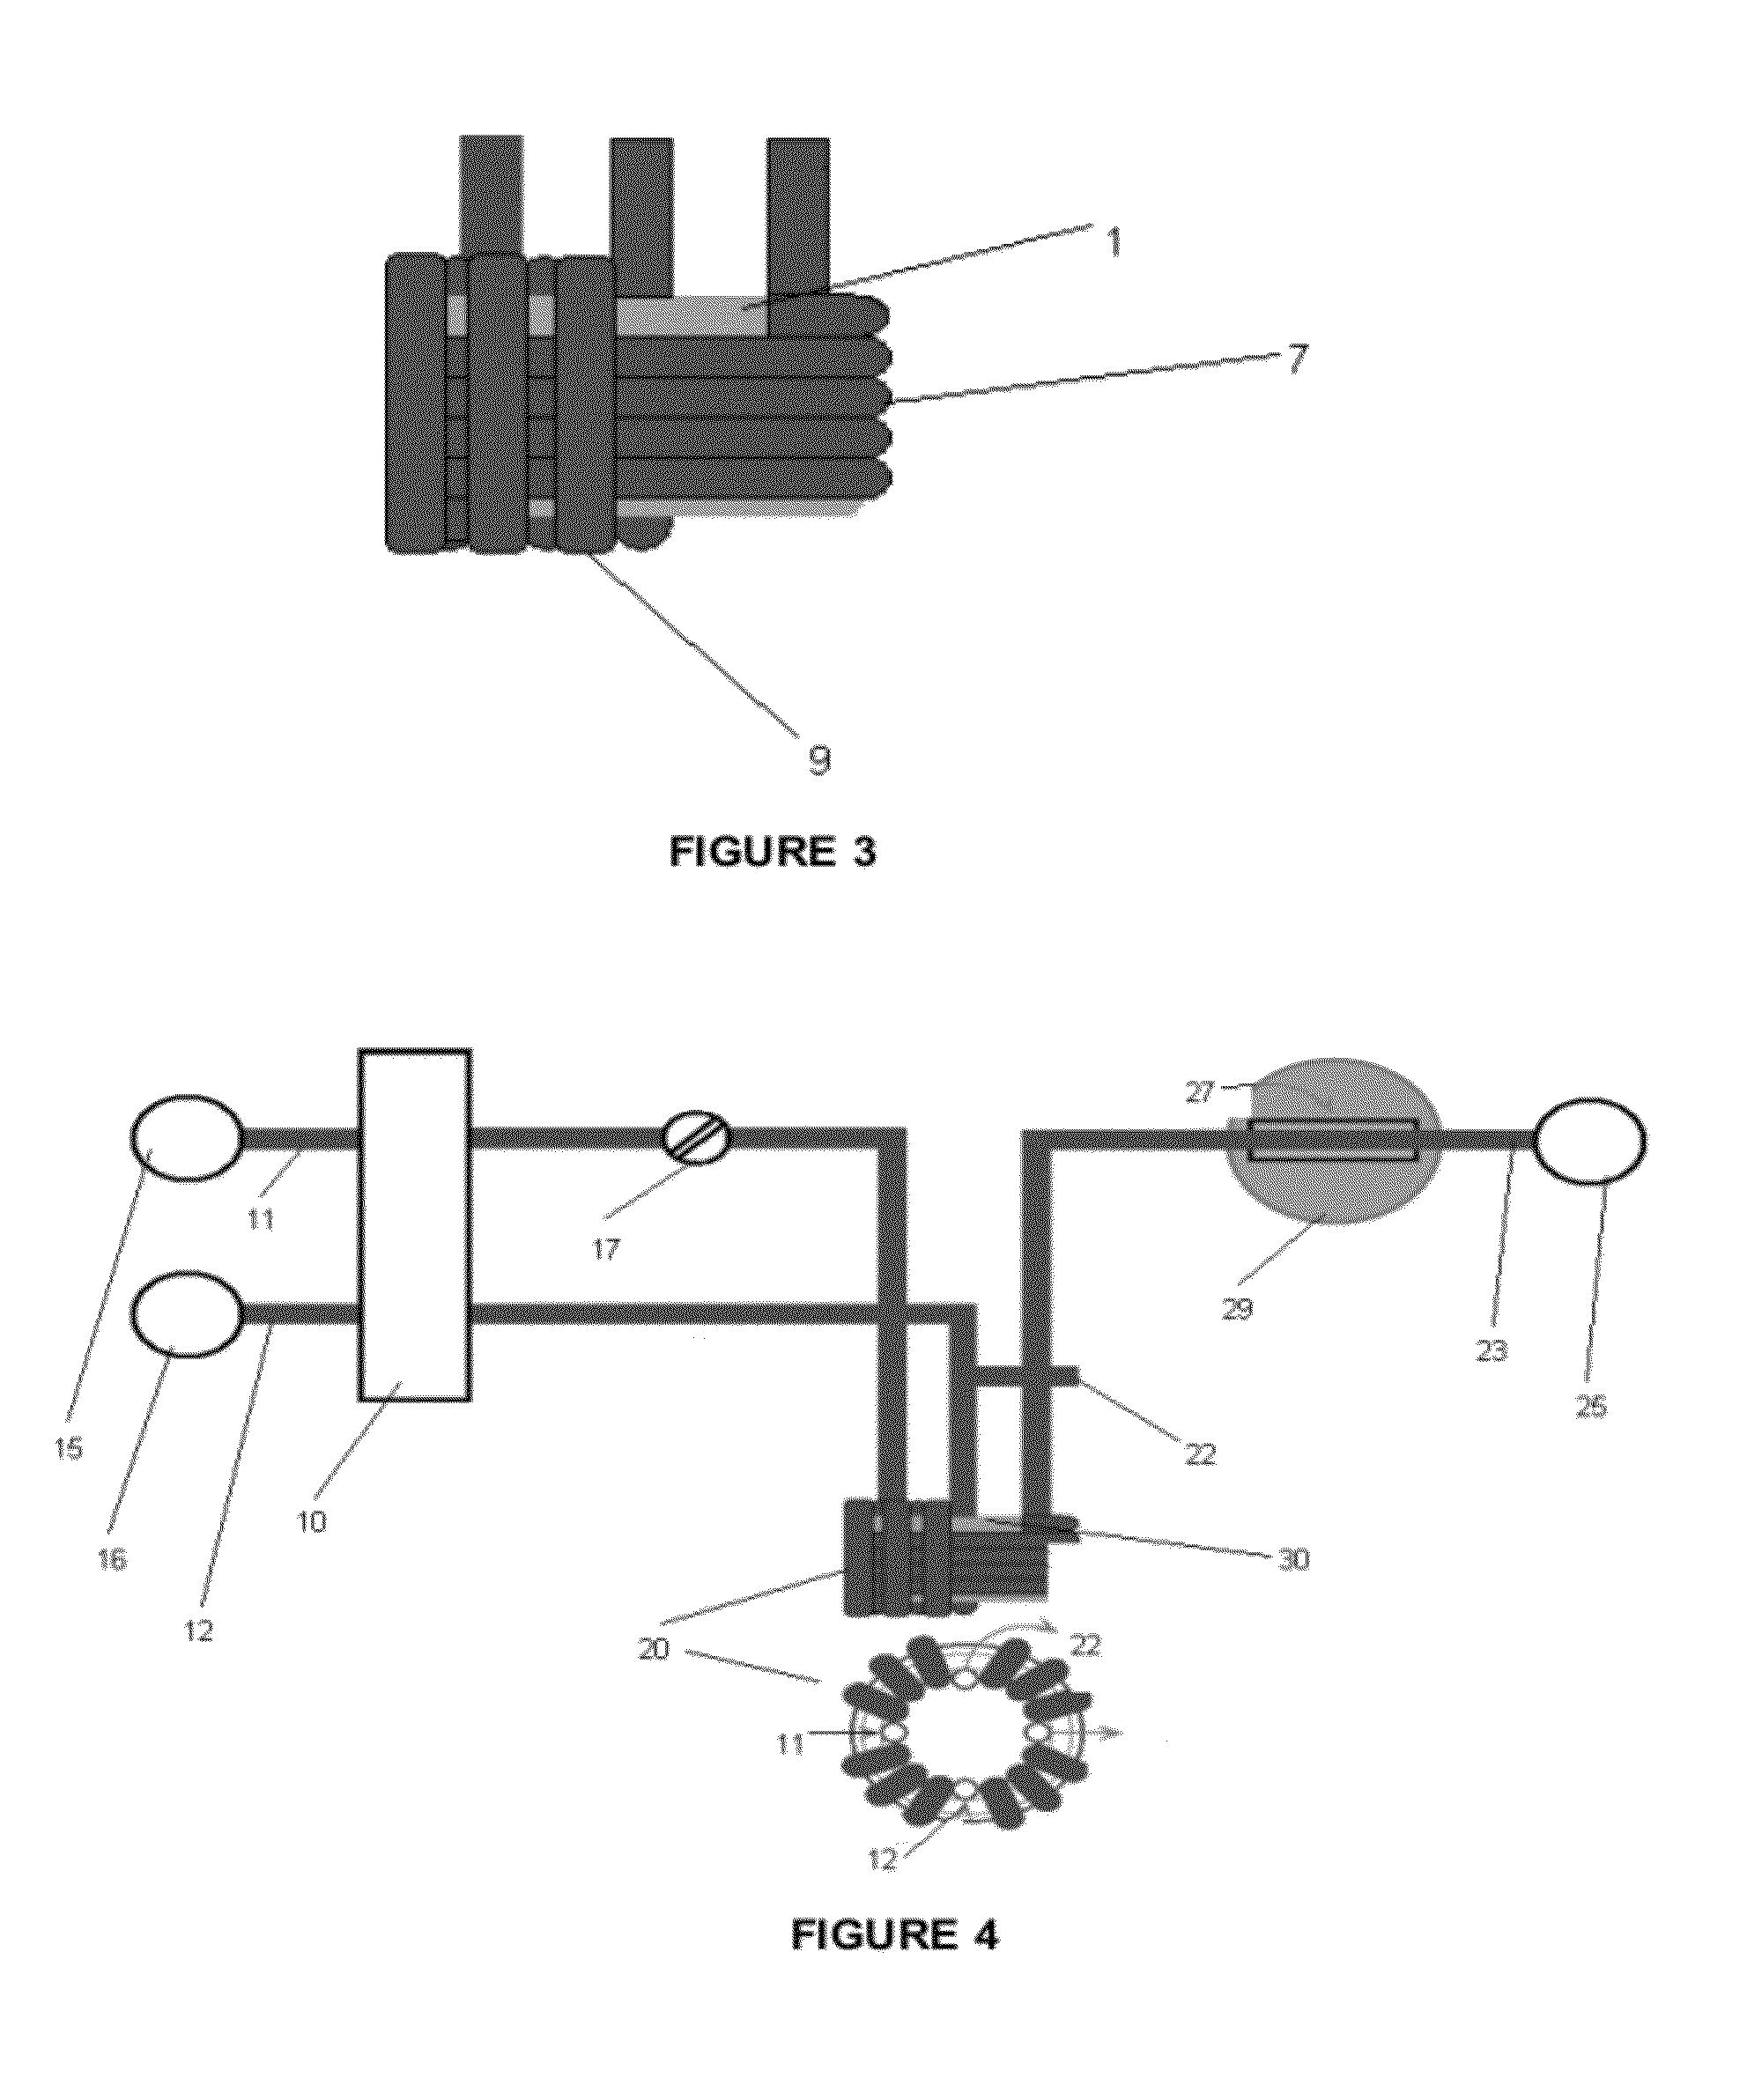 Method and apparatus for novel neutron activation geometries in a flowing carrier stream